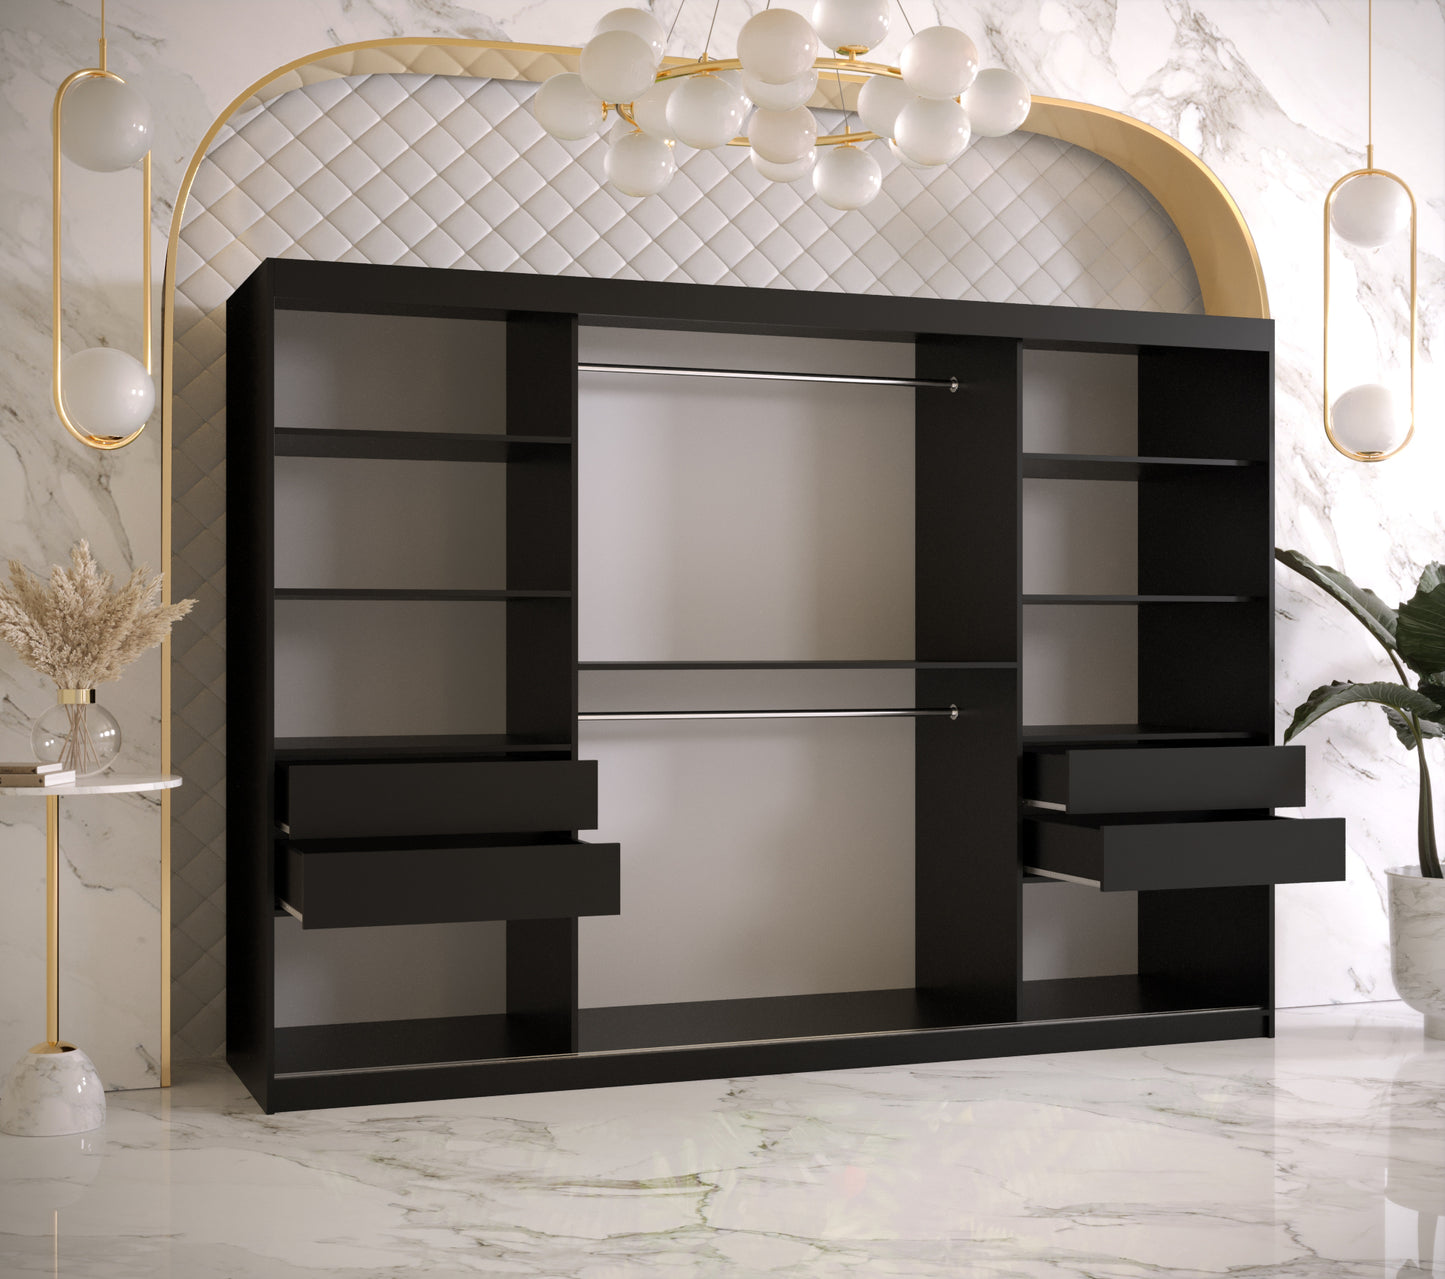 FLORENCE - Wardrobe Sliding Doors Black with Unique Pattern, Shelves, Rails, Drawers Optional, ASSEMBLY INCLUDED>250cm<